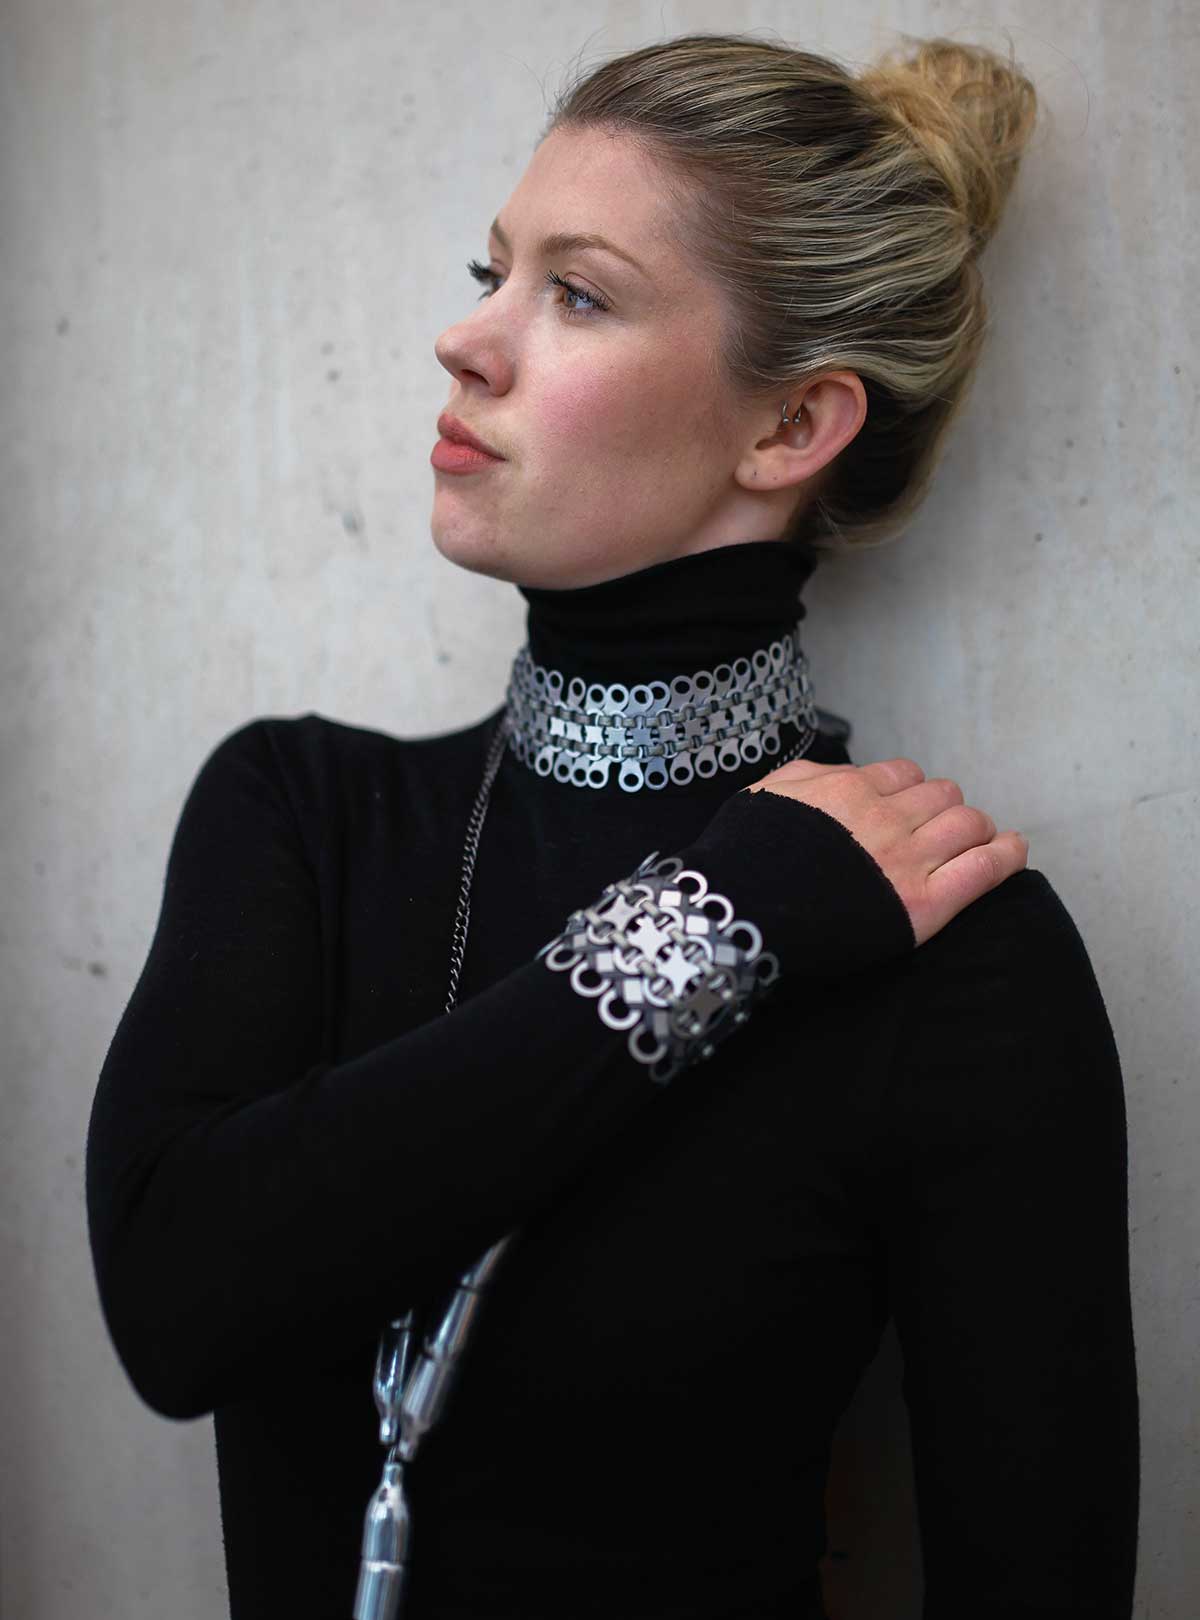 ReGo participant wearing jewellery designed by Michelle Lowe Holder - Photography by Eugenie Flochel